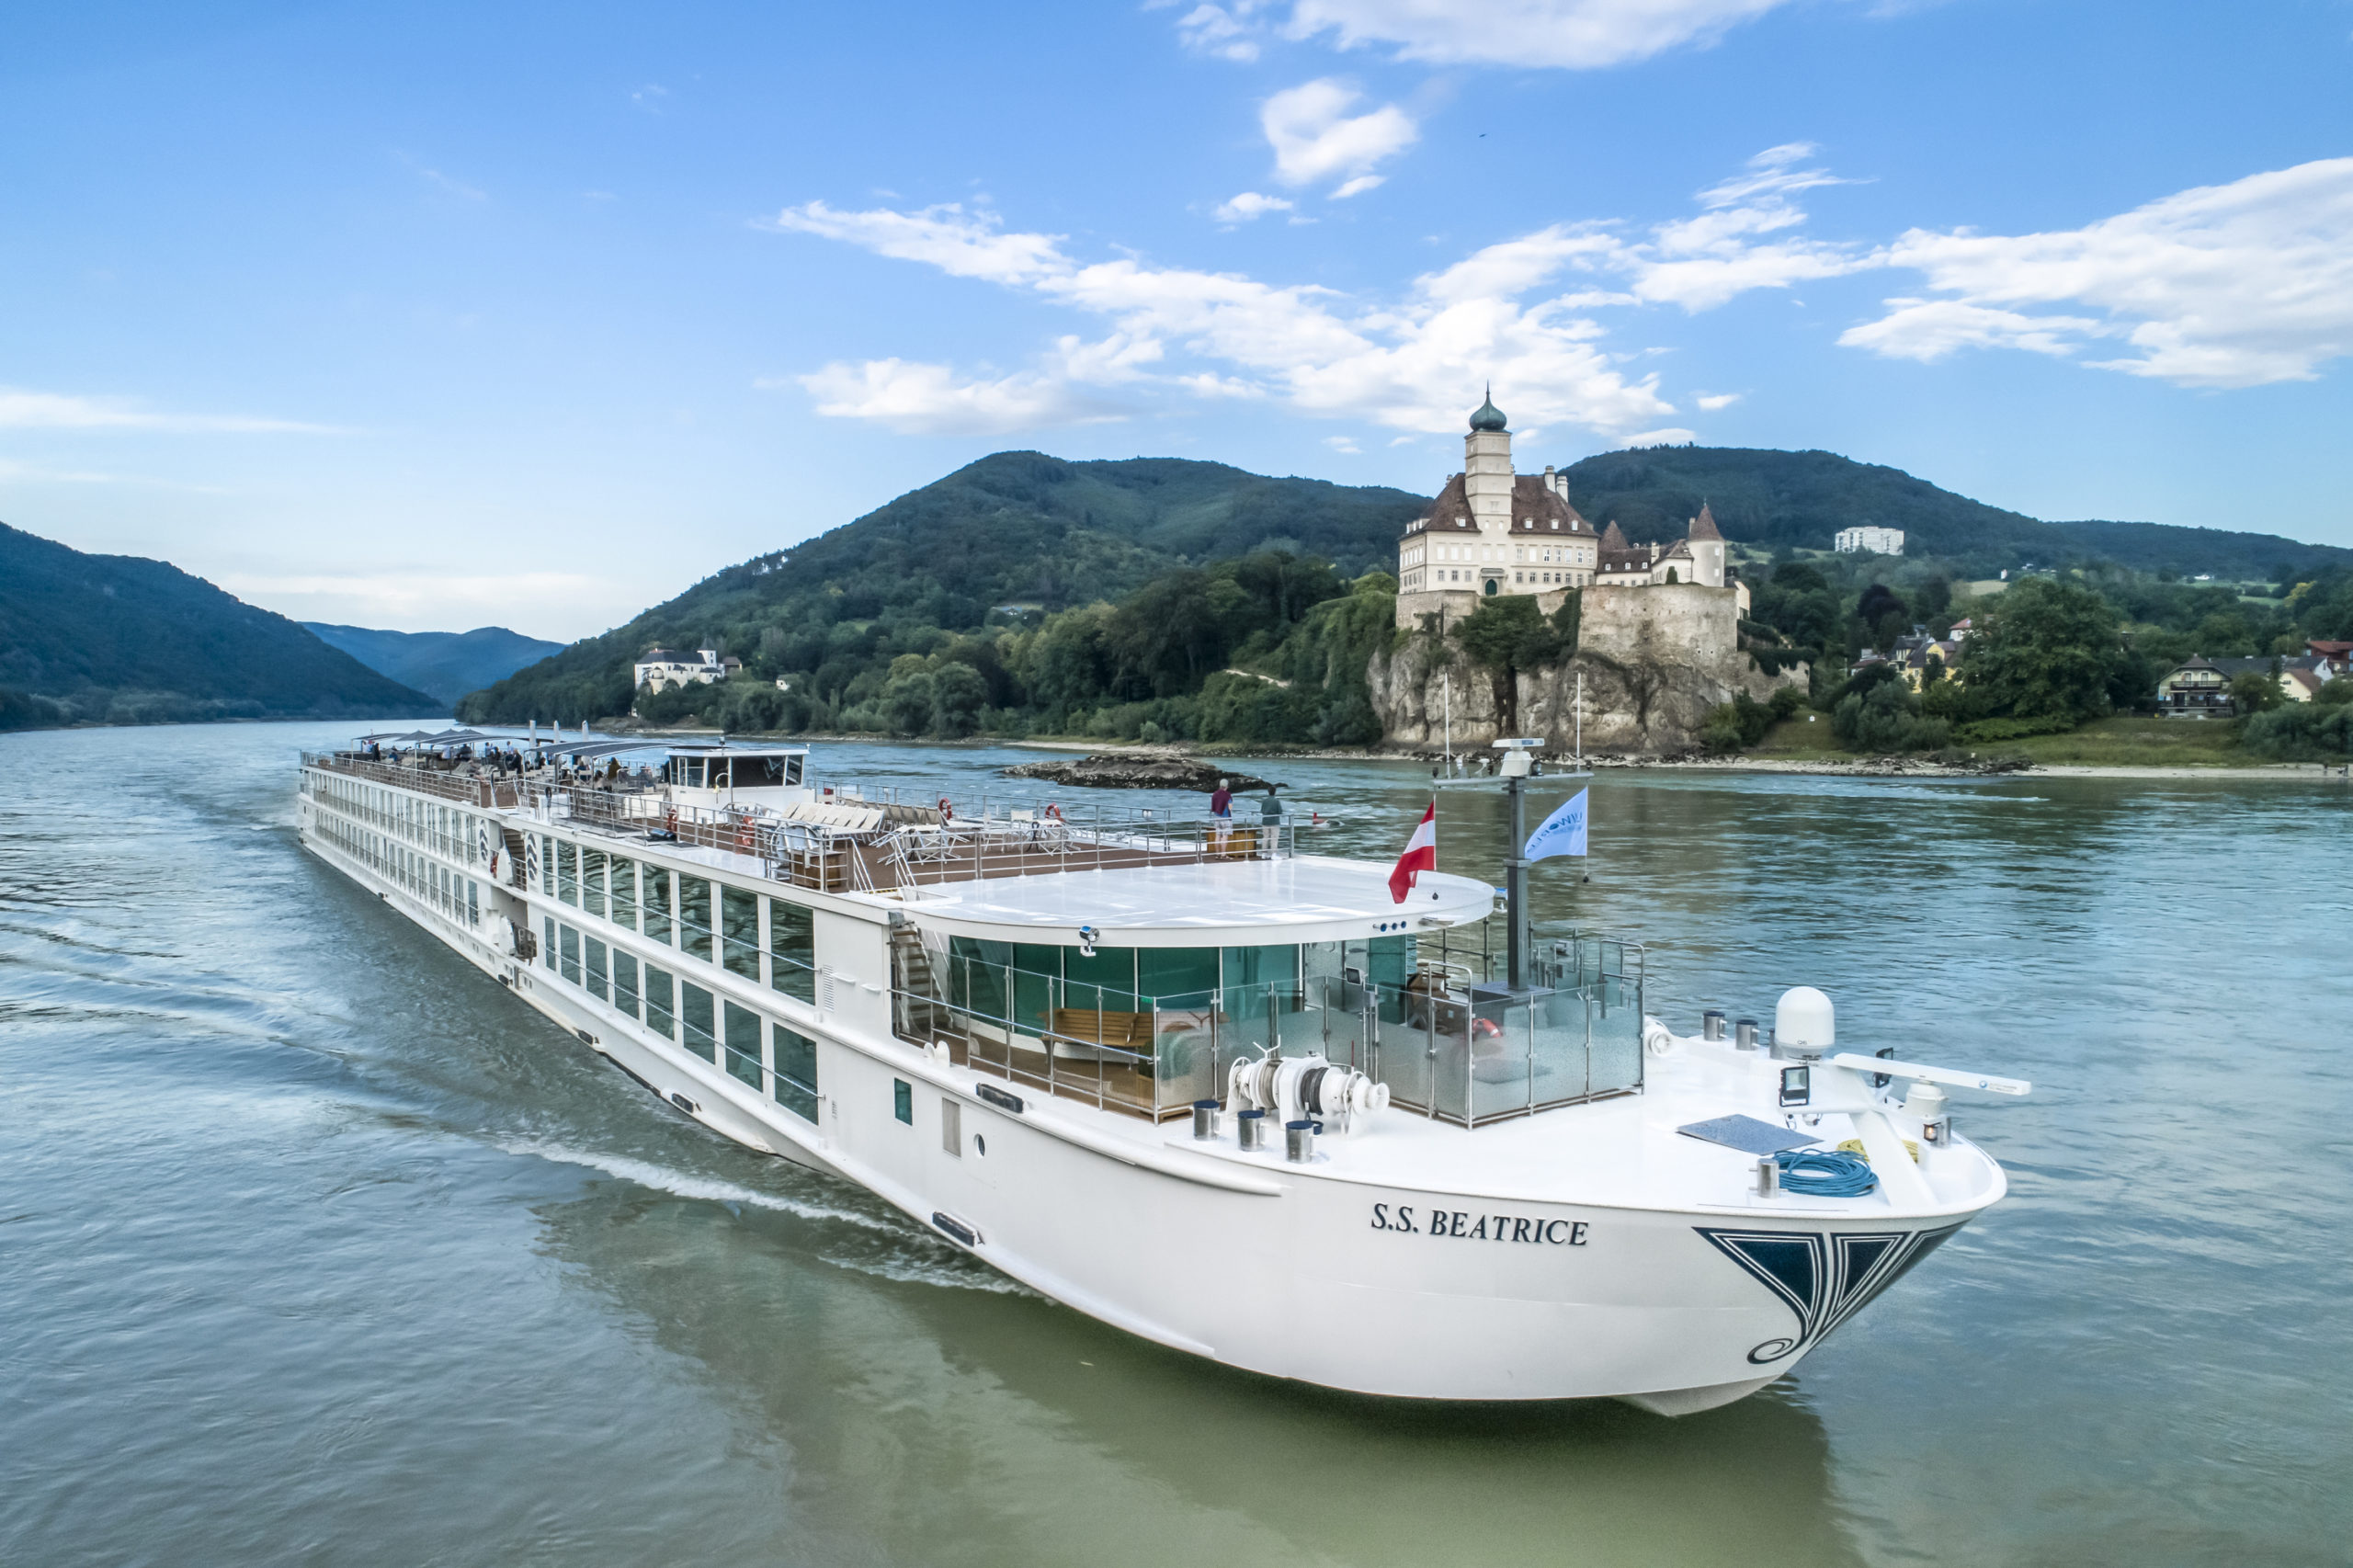 Uniworld Boutique River Cruises has announced a new itinerary for 2022 and a new pre-cruise extension in celebration of the Oberammergau Passion Play. 